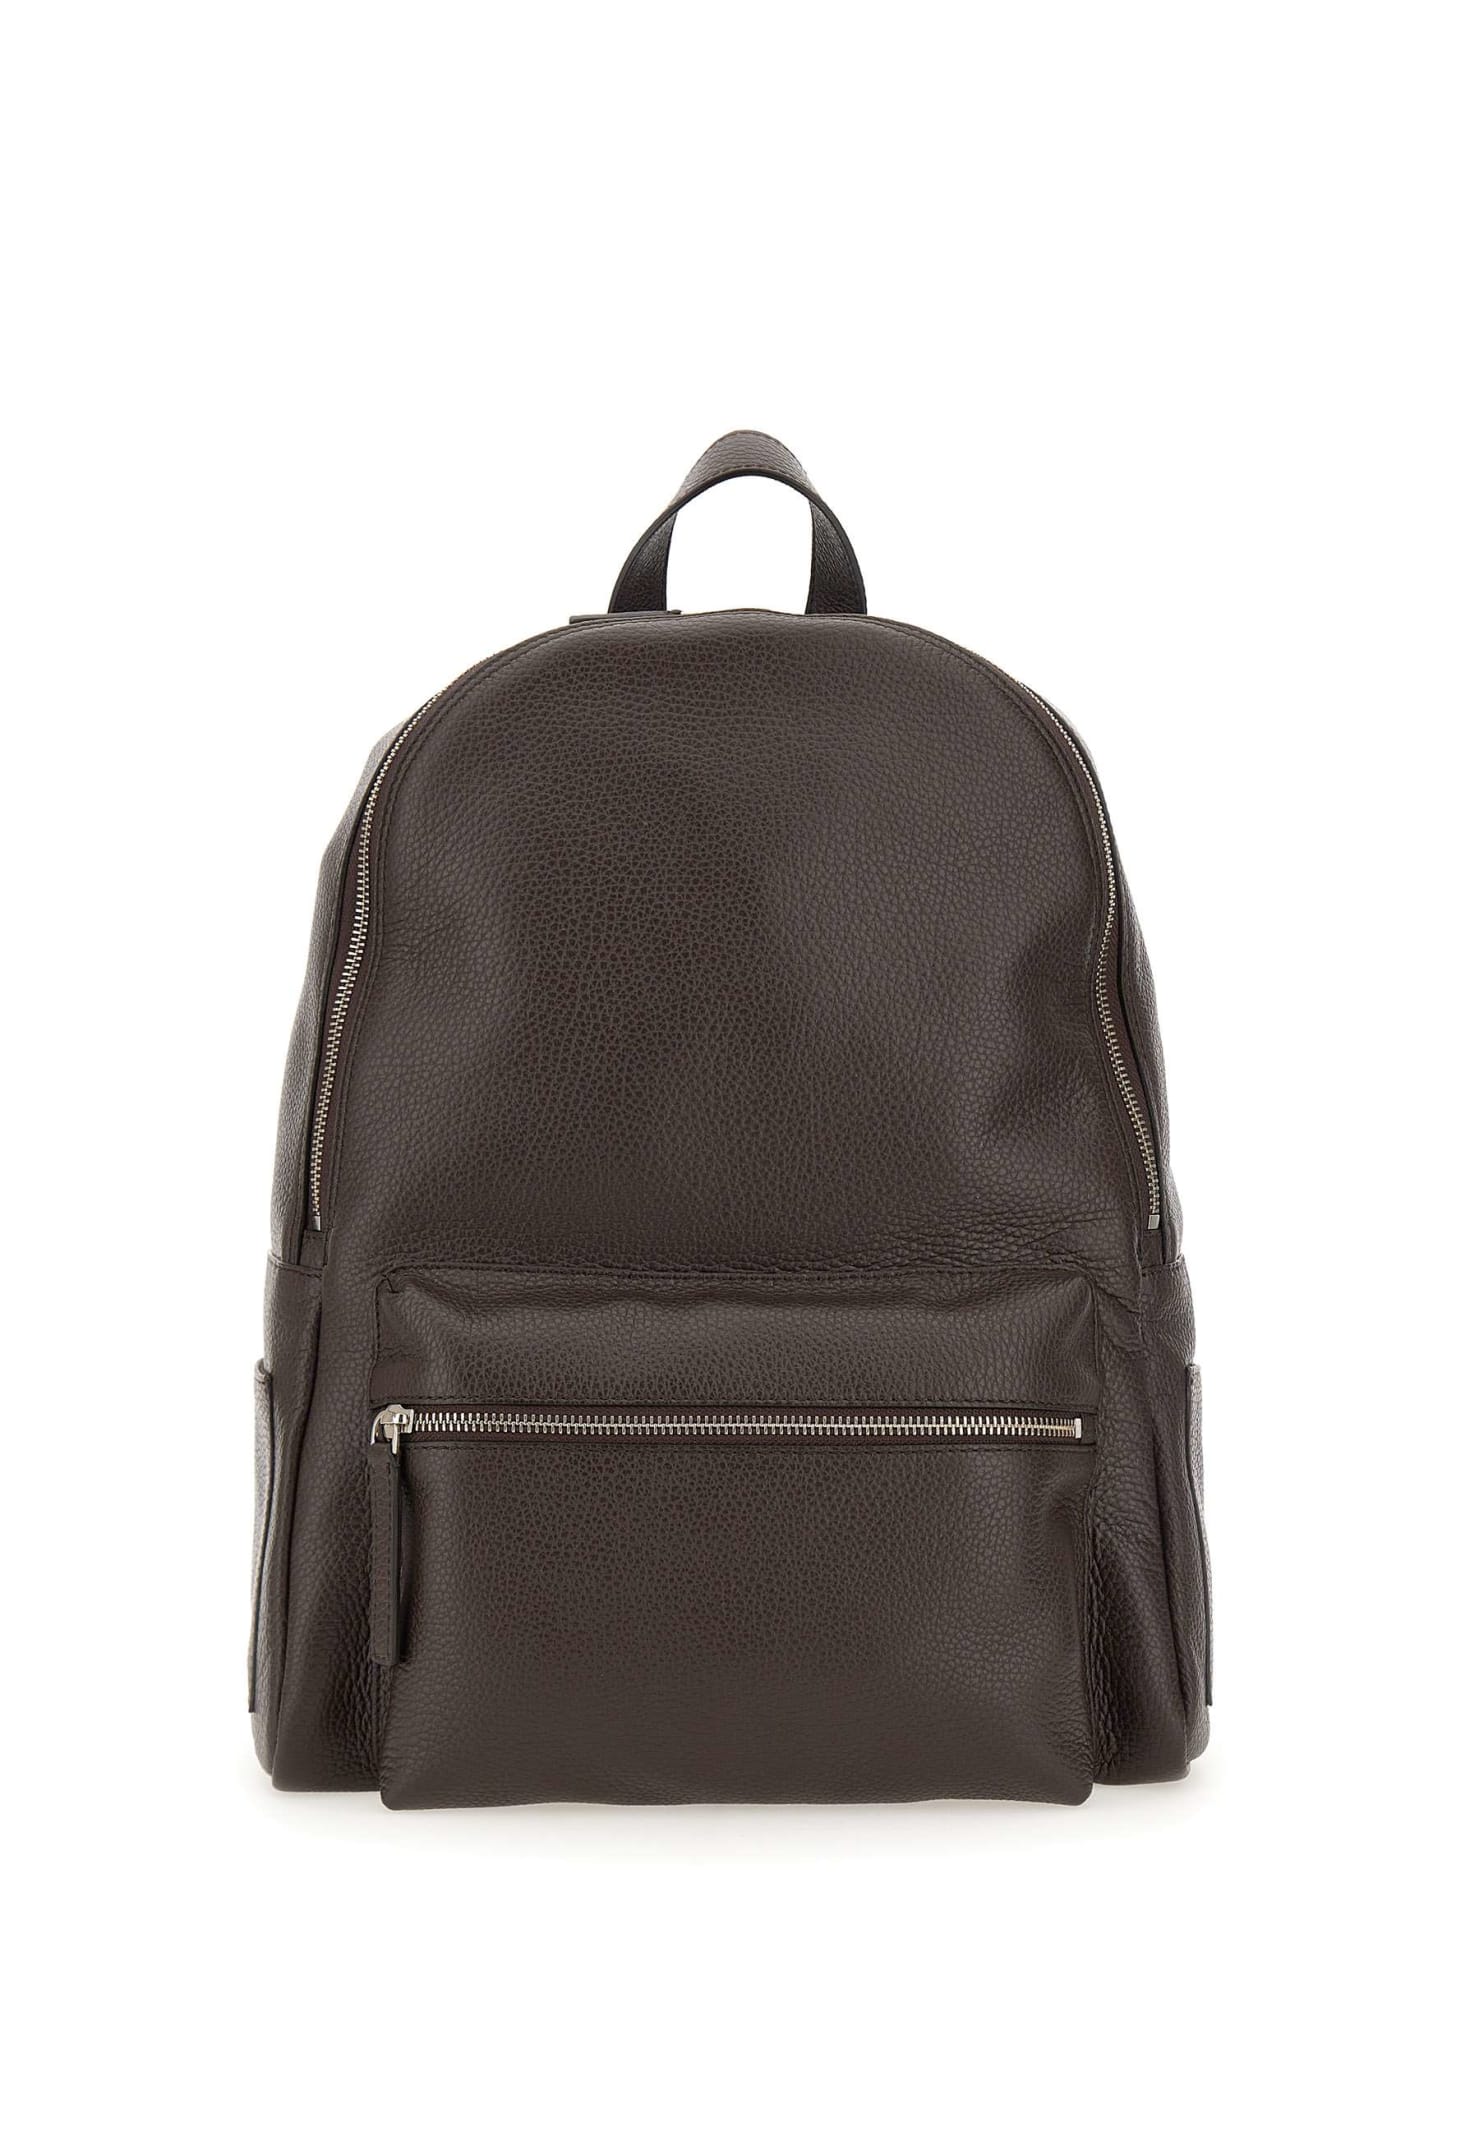 ORCIANI MICRON LEATHER BACKPACK